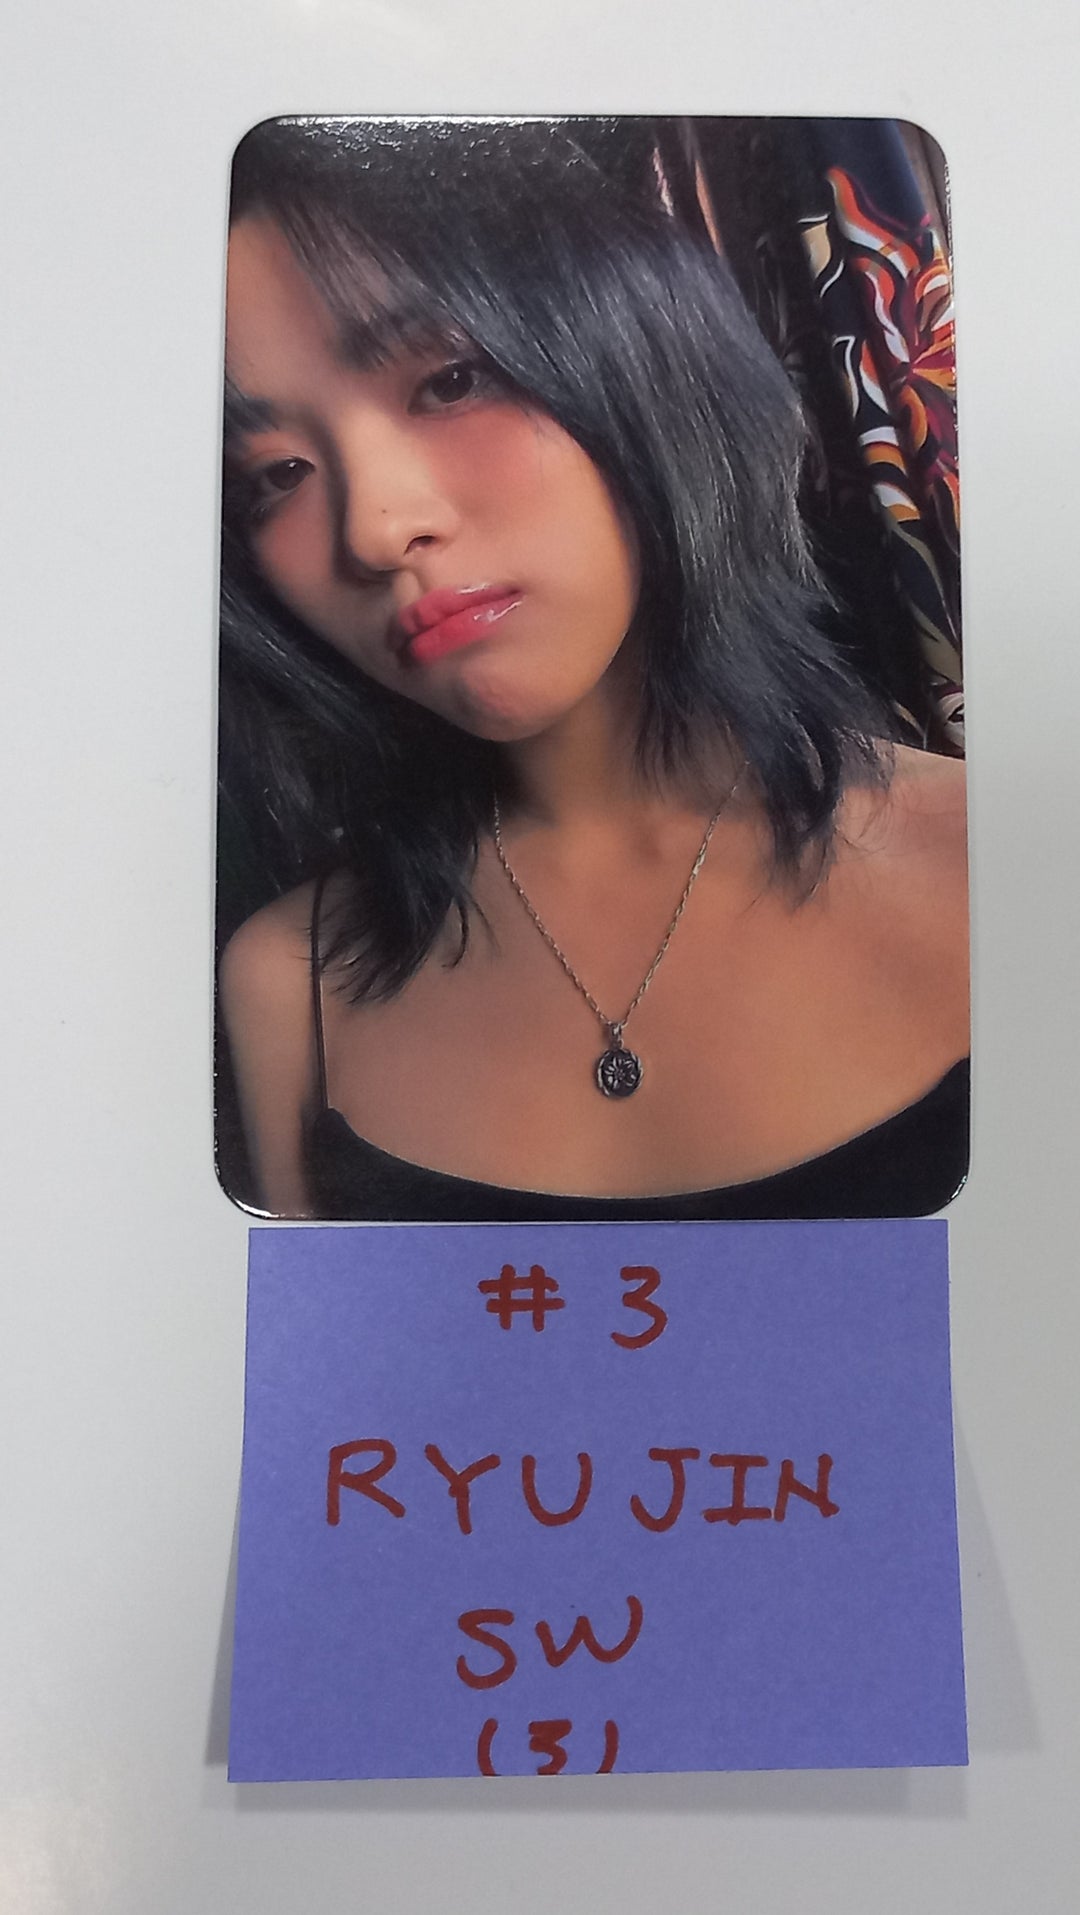 ITZY "BORN TO BE" - Soundwave Fansign Event Photocard [24.1.10]